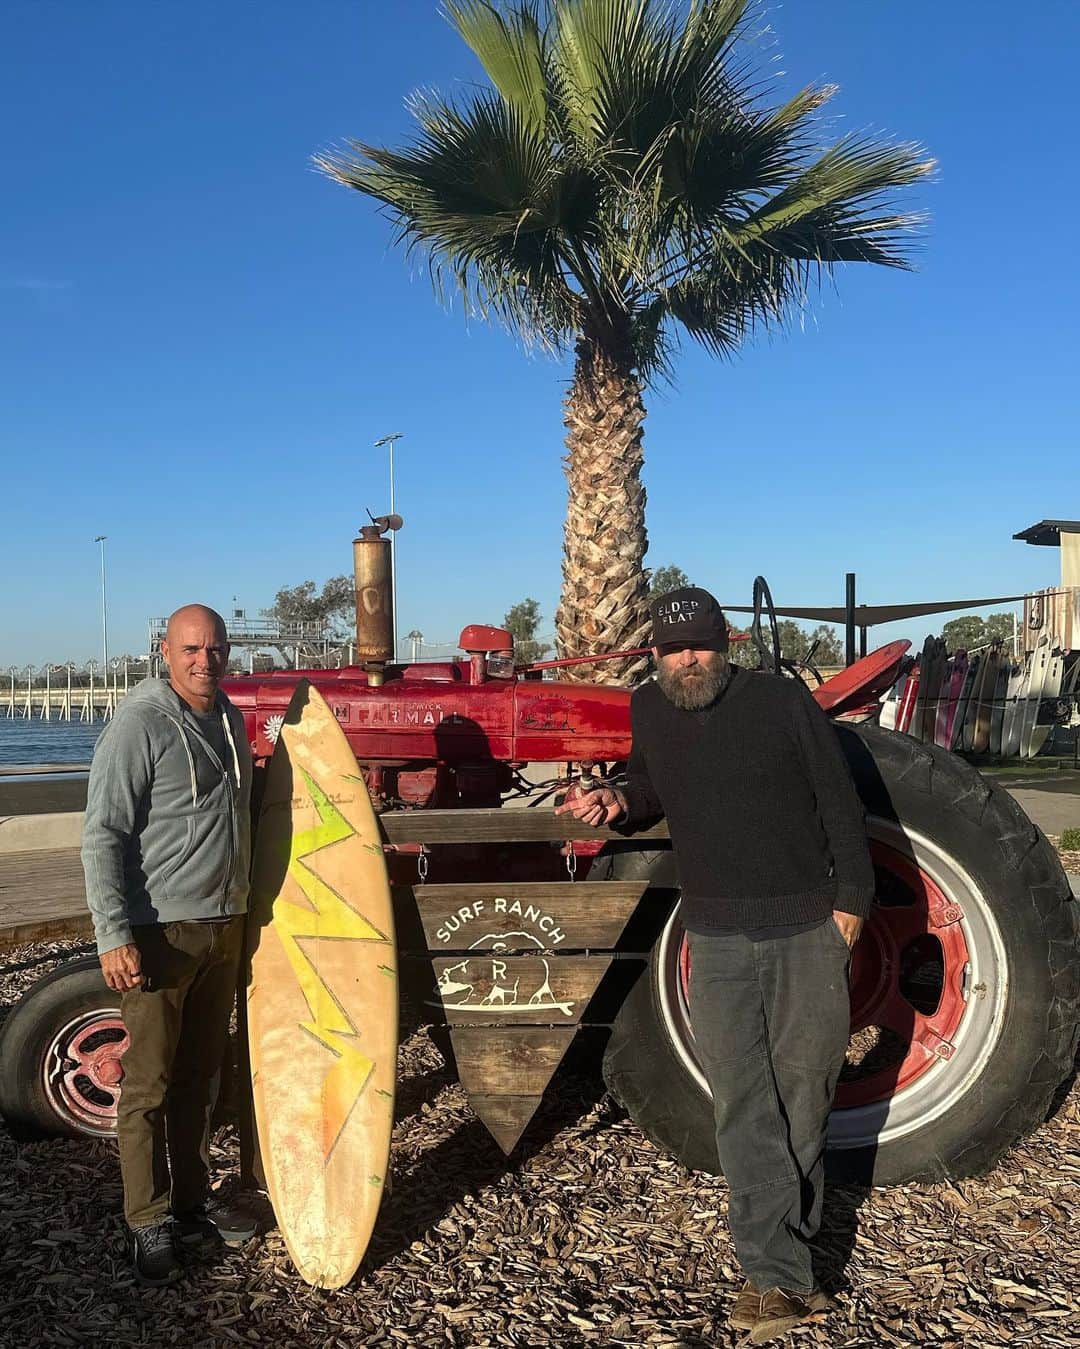 ケリー・スレーターさんのインスタグラム写真 - (ケリー・スレーターInstagram)「Surf Ranch yesterday, and what a day it was.  When I was 16 I needed a last minute board for a PSAA wave pool event in Irvine, CA at Wild Rivers Waterpark. @matt_kechele shaped me a board (the last one he shaped me before I started riding for @cisurfboards and Al Merrick later that summer) but it wasn’t getting glassed and sanded in time. I picked it up on the way to the airport but the resin was still tacky so I kept the windows down in the car and threw it in the bag at the airport. When I got to CA, I sanded it by hand on Main Street in Huntington. I went on to win the event and get a @surfing_magazine cover shot on the board in the process, but small correction…it was shot by @peterbrouillet. Larry ‘Flame’ Moore later told me that they added some spray to the turn in an early form of a photoshop trickery. A couple months later I won my 4th and final US Title on this board at Sandy Beach in Hawaii.  Yesterday @chris_malloy_yarning showed up with the board at Surf Ranch after it lived with his family for 35 years. Cool full circle moment from my first wave pool experience to the latest version.   To top it off, the Surf Ranch crew gifted me a new Ski, a ton of good friends showed up to surf together, a buddy buzzed the pool in his plane to say hello, one of my best friends I haven’t seen in over a year showed up just after his 50th bday and recent marriage, and we put a pretty good house band and singer together to finish it off.  Sometimes I’ve gotta pinch myself. 🙏🏽  P.S. Maybe we should have a contest on this thing at Surf Ranch…1 right, 1 left, no practice?」10月28日 11時48分 - kellyslater